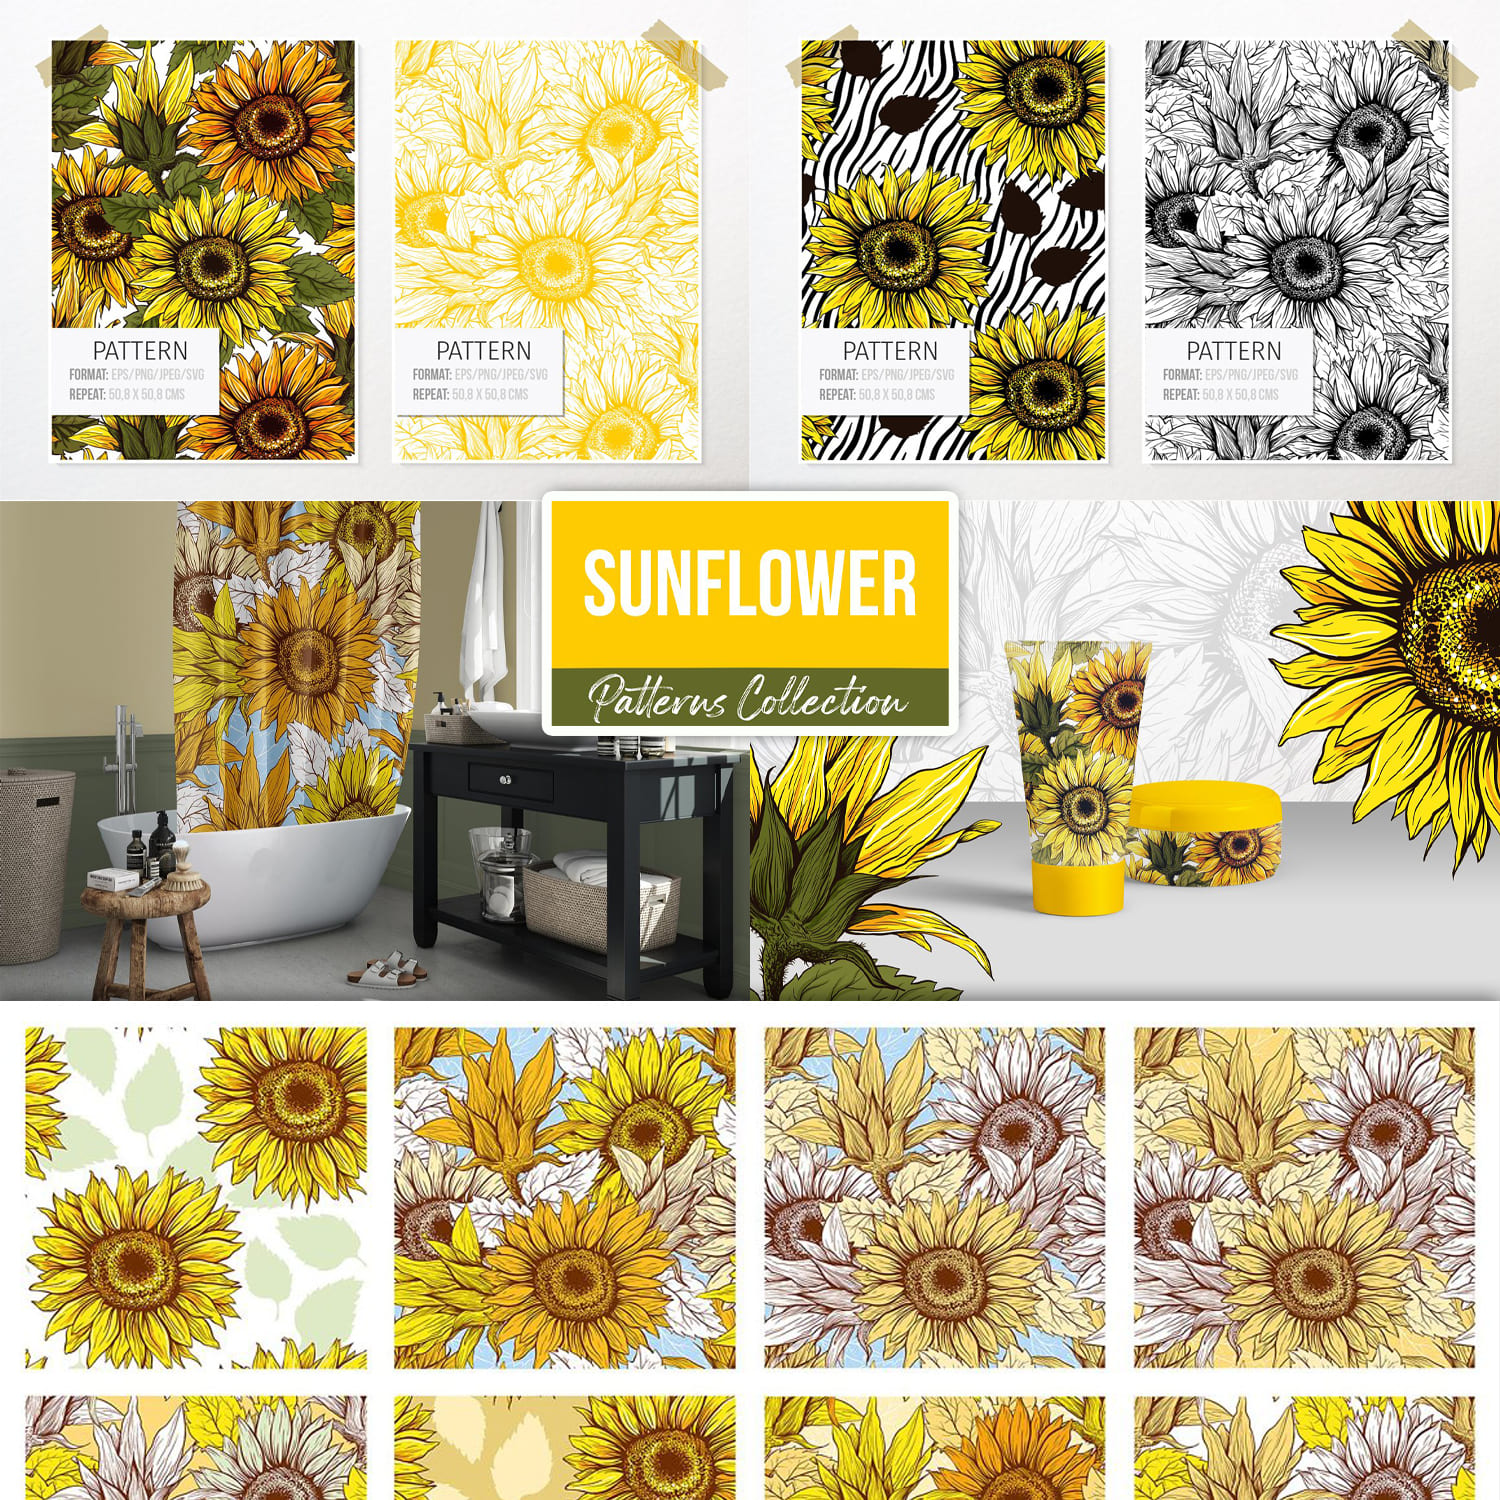 Sunflower patterns collection - main image preview.